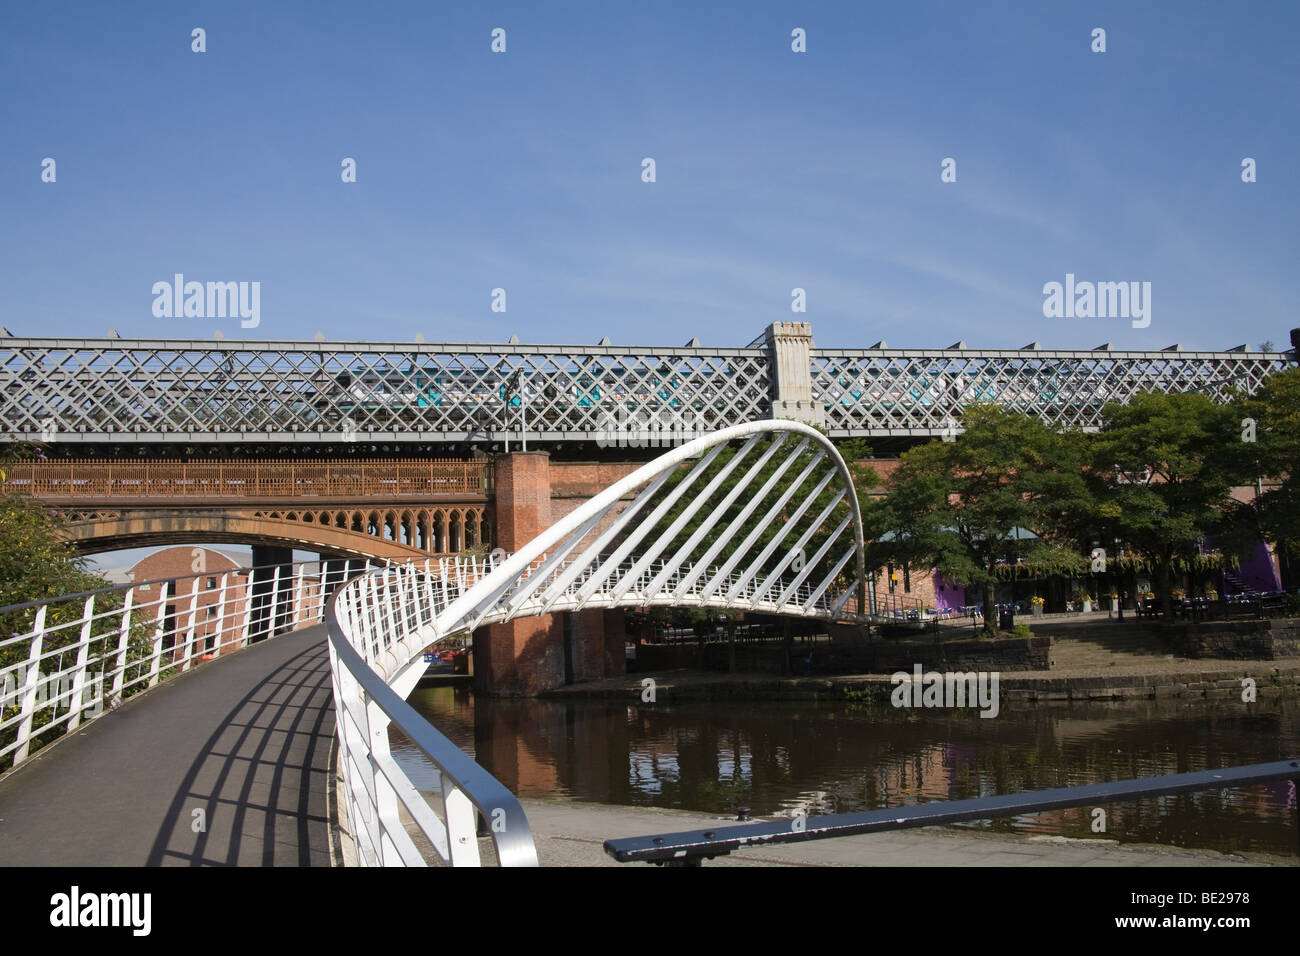 Manchester England UK Pedestrian footbridge over Giant canal basin and railway bridges in Castlefields area of city world's first urban heritage park Stock Photo